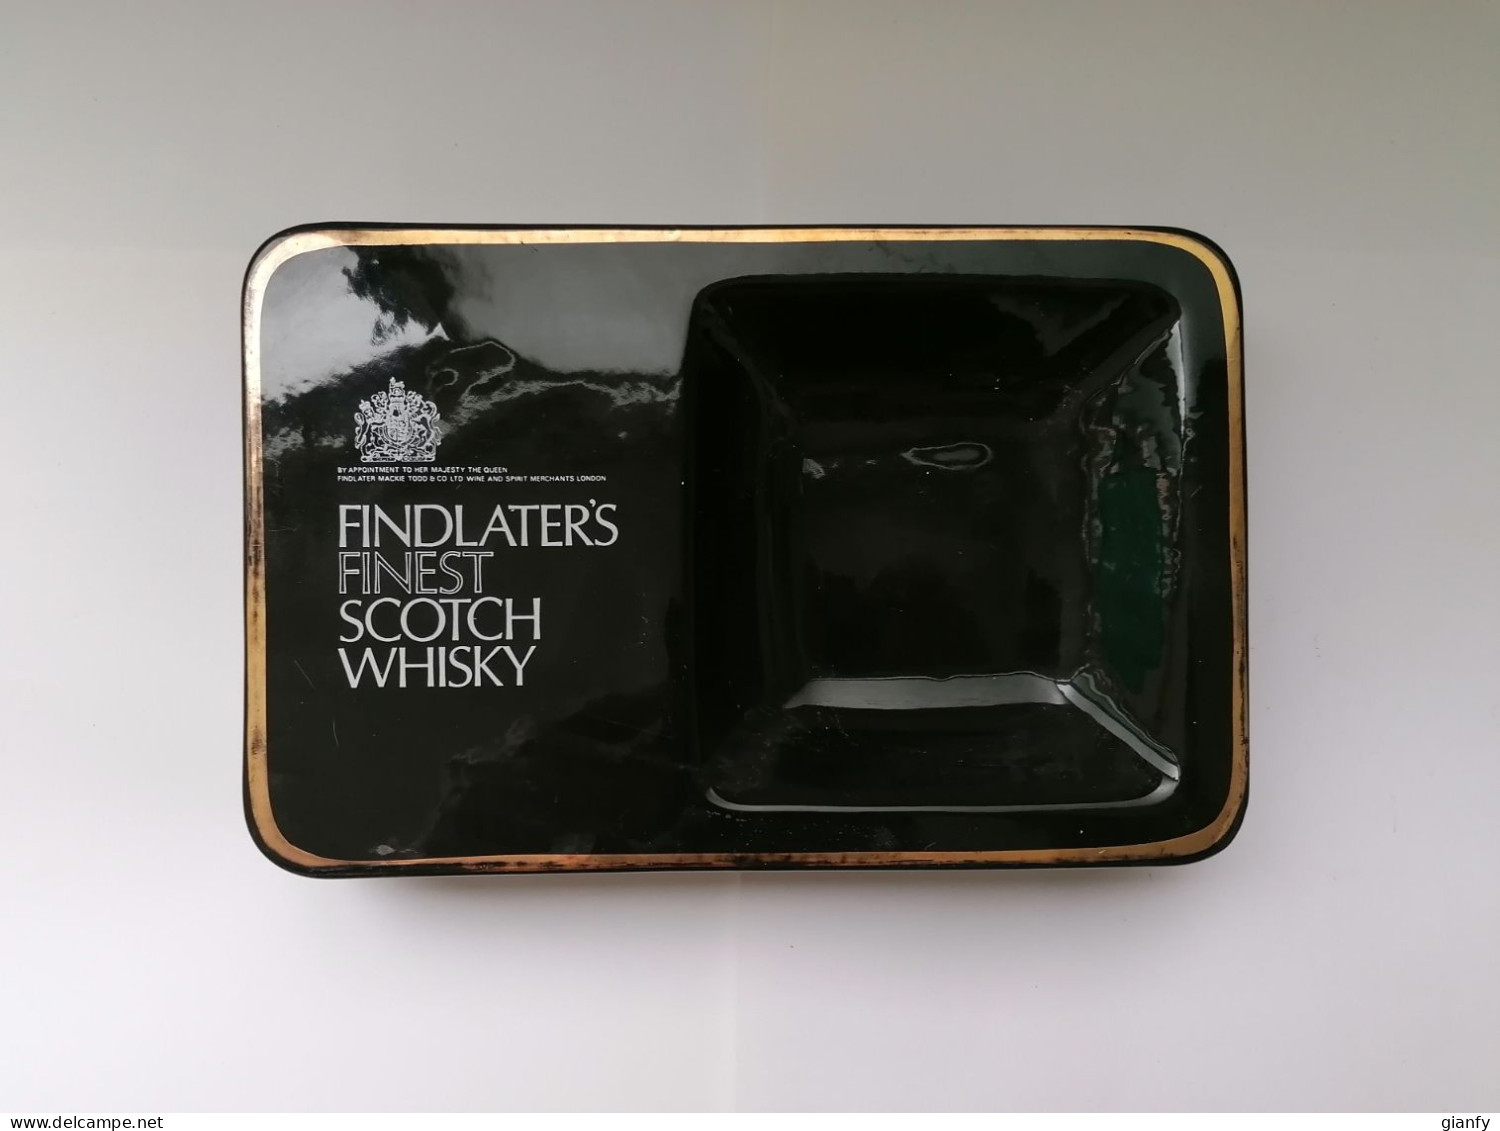 POSACENERE IN CERAMICA PUBBLICITA "FINDLATER'S" FINEST SCOTCH WHISKY 1990 ASHTRAY ADVERTISING MADE IN ENGLAND - Porcelain